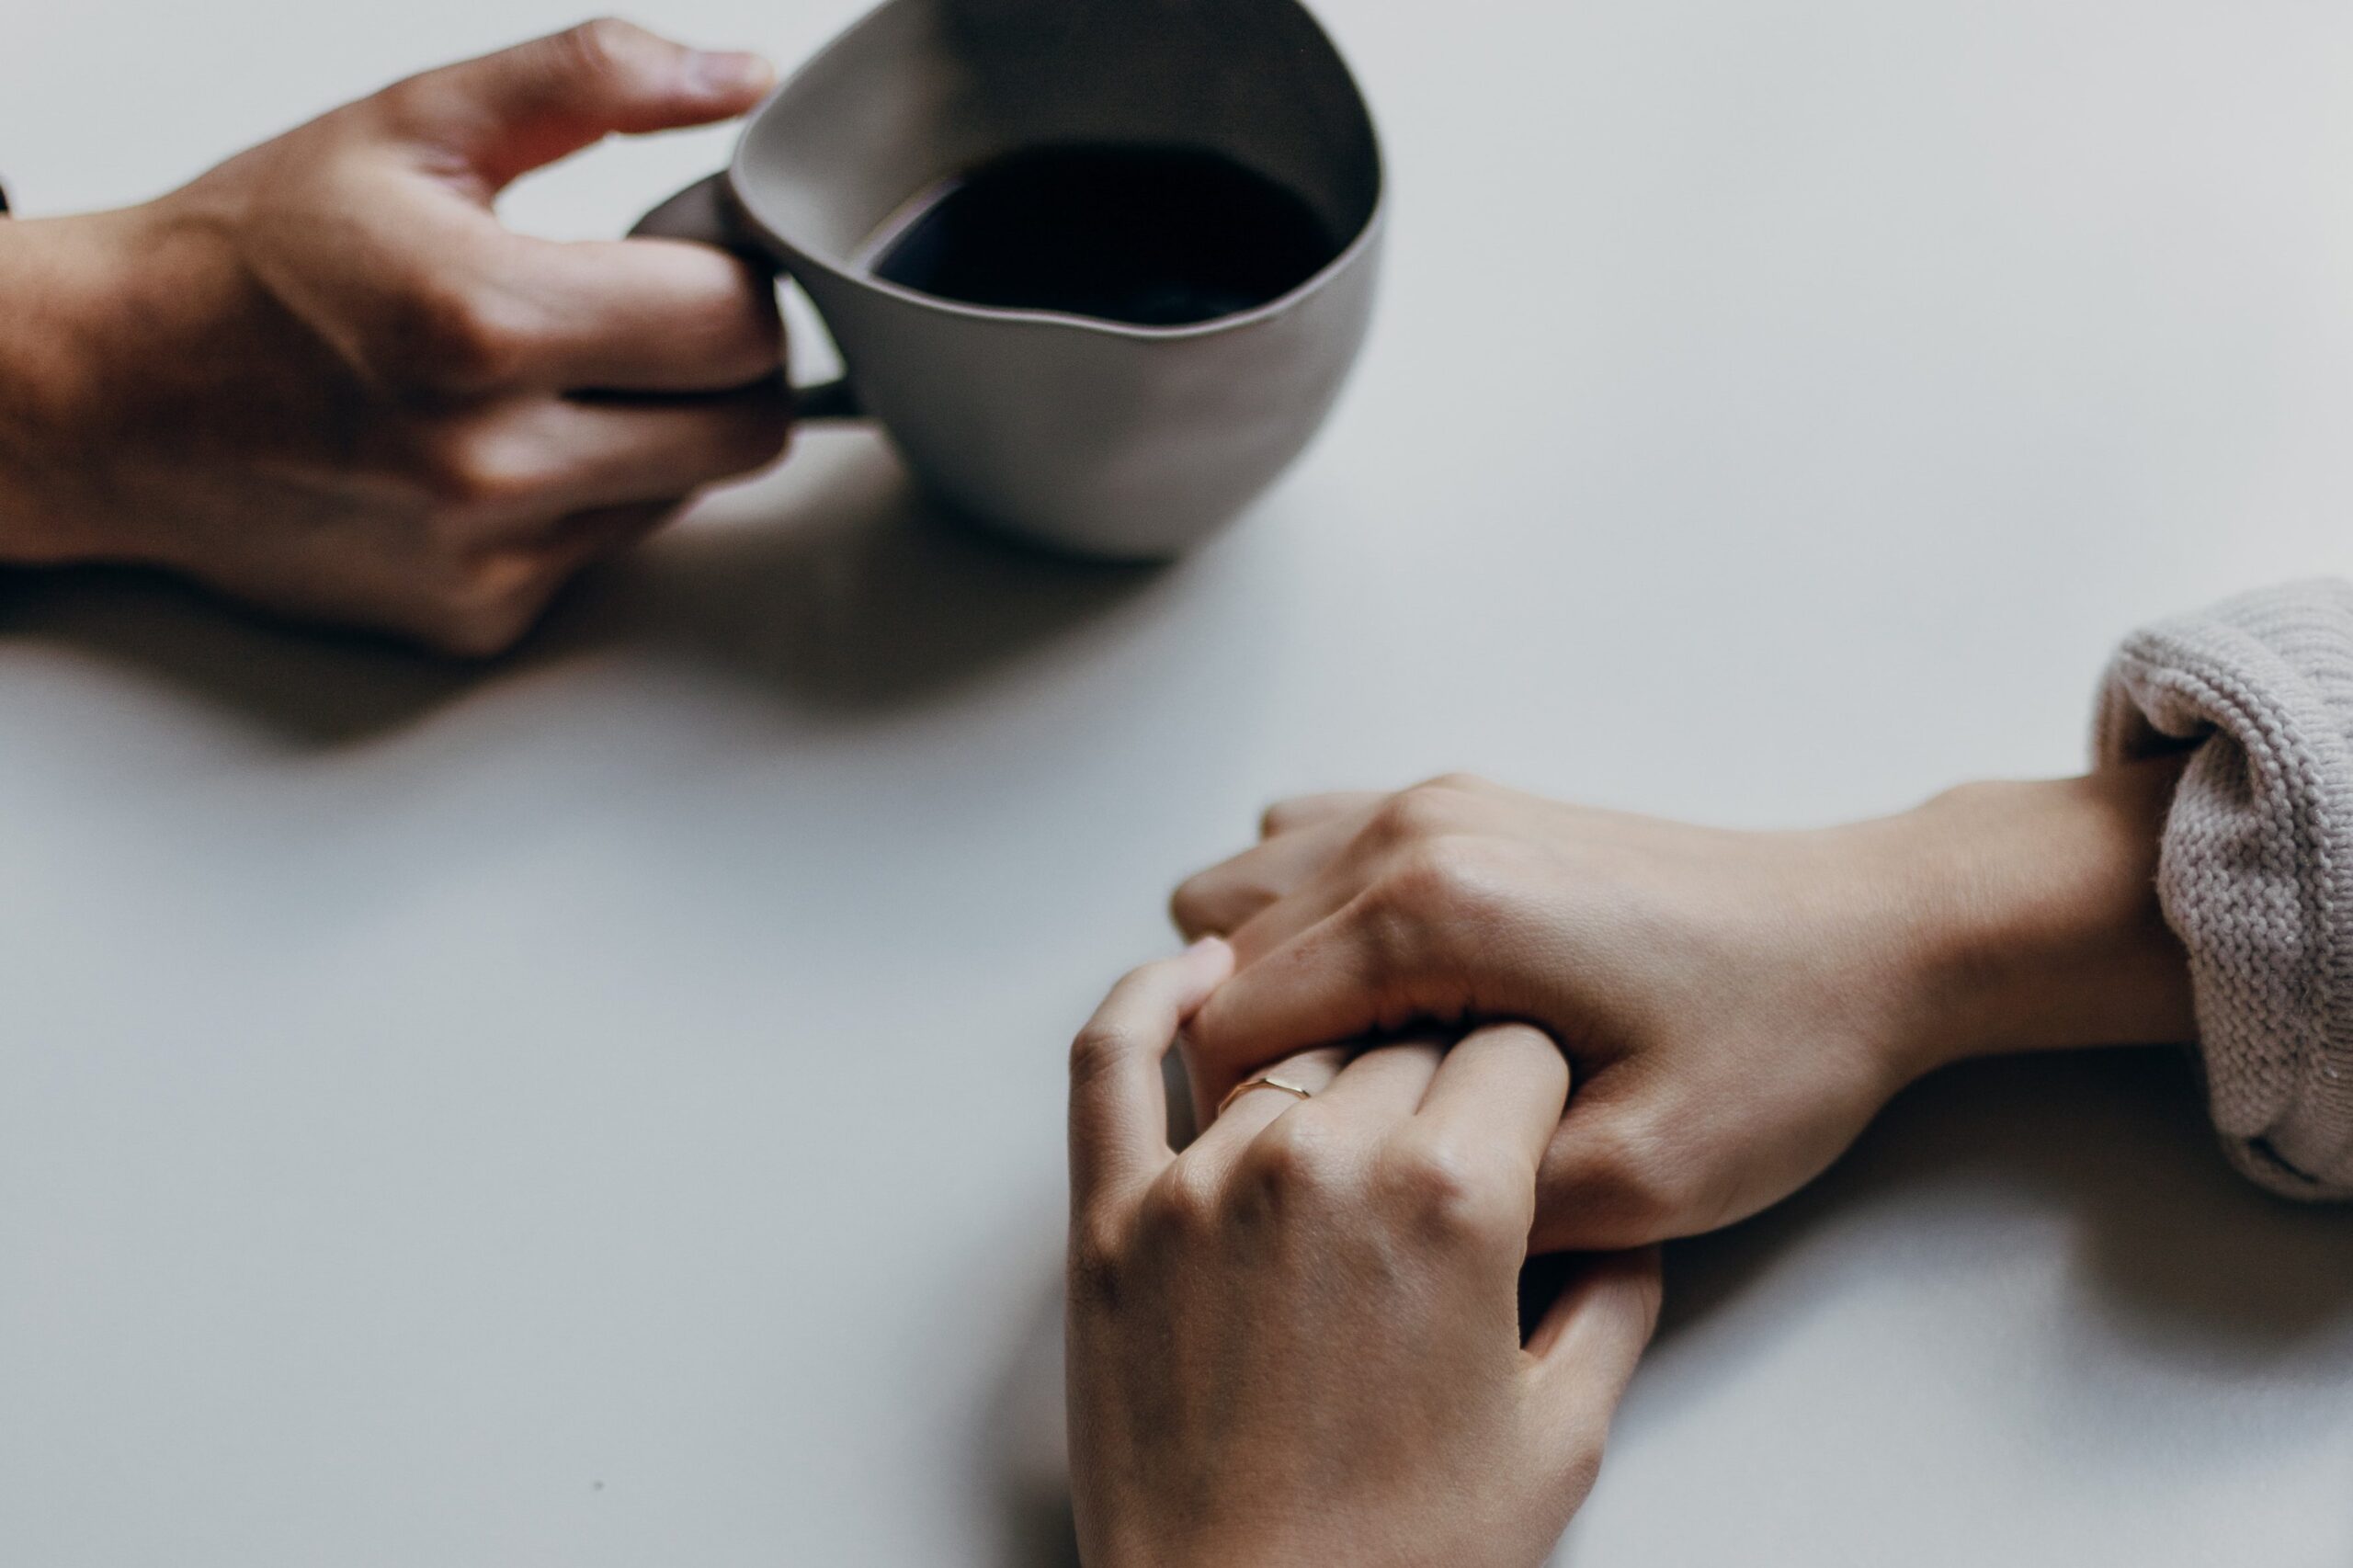 A hand holding a cup of coffee and another pair of hands nearby